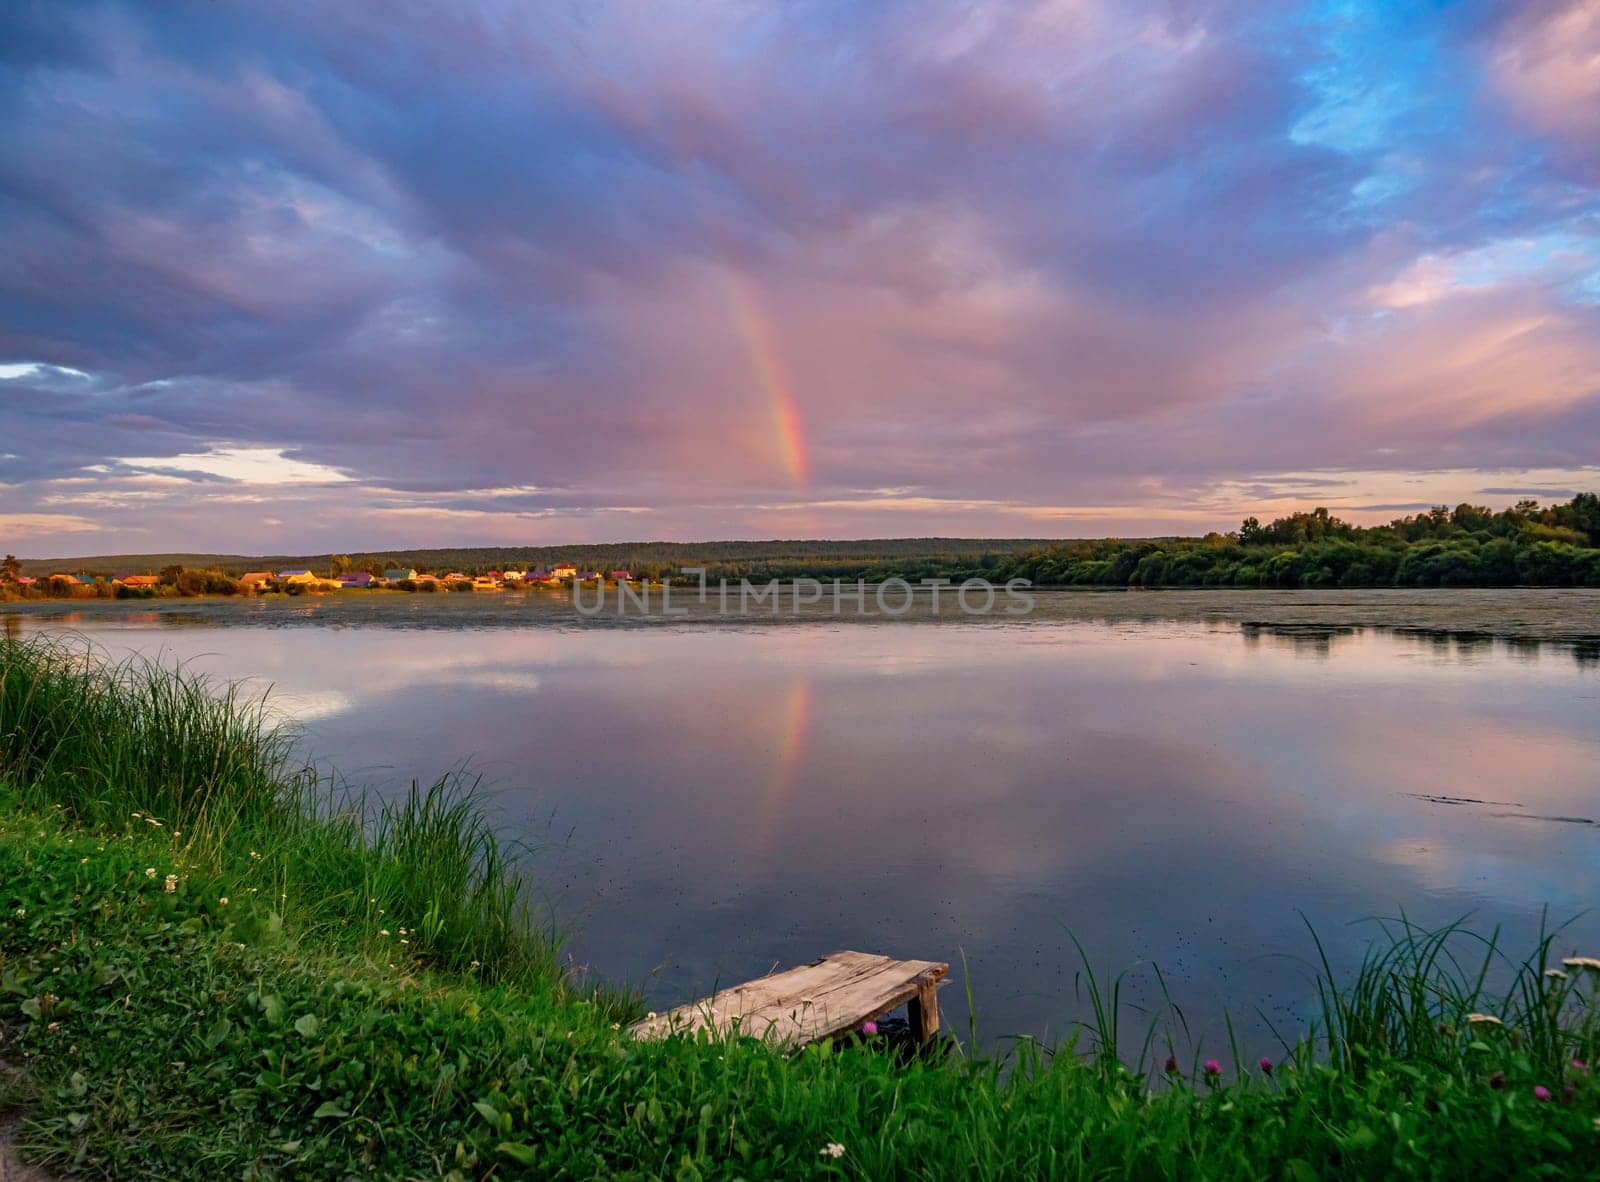 A serene countryside scene during sunset, showcasing a tranquil lake with a wooden dock in the foreground. A rainbow is reflected in the water, surrounded by a soft pink and purple sky.